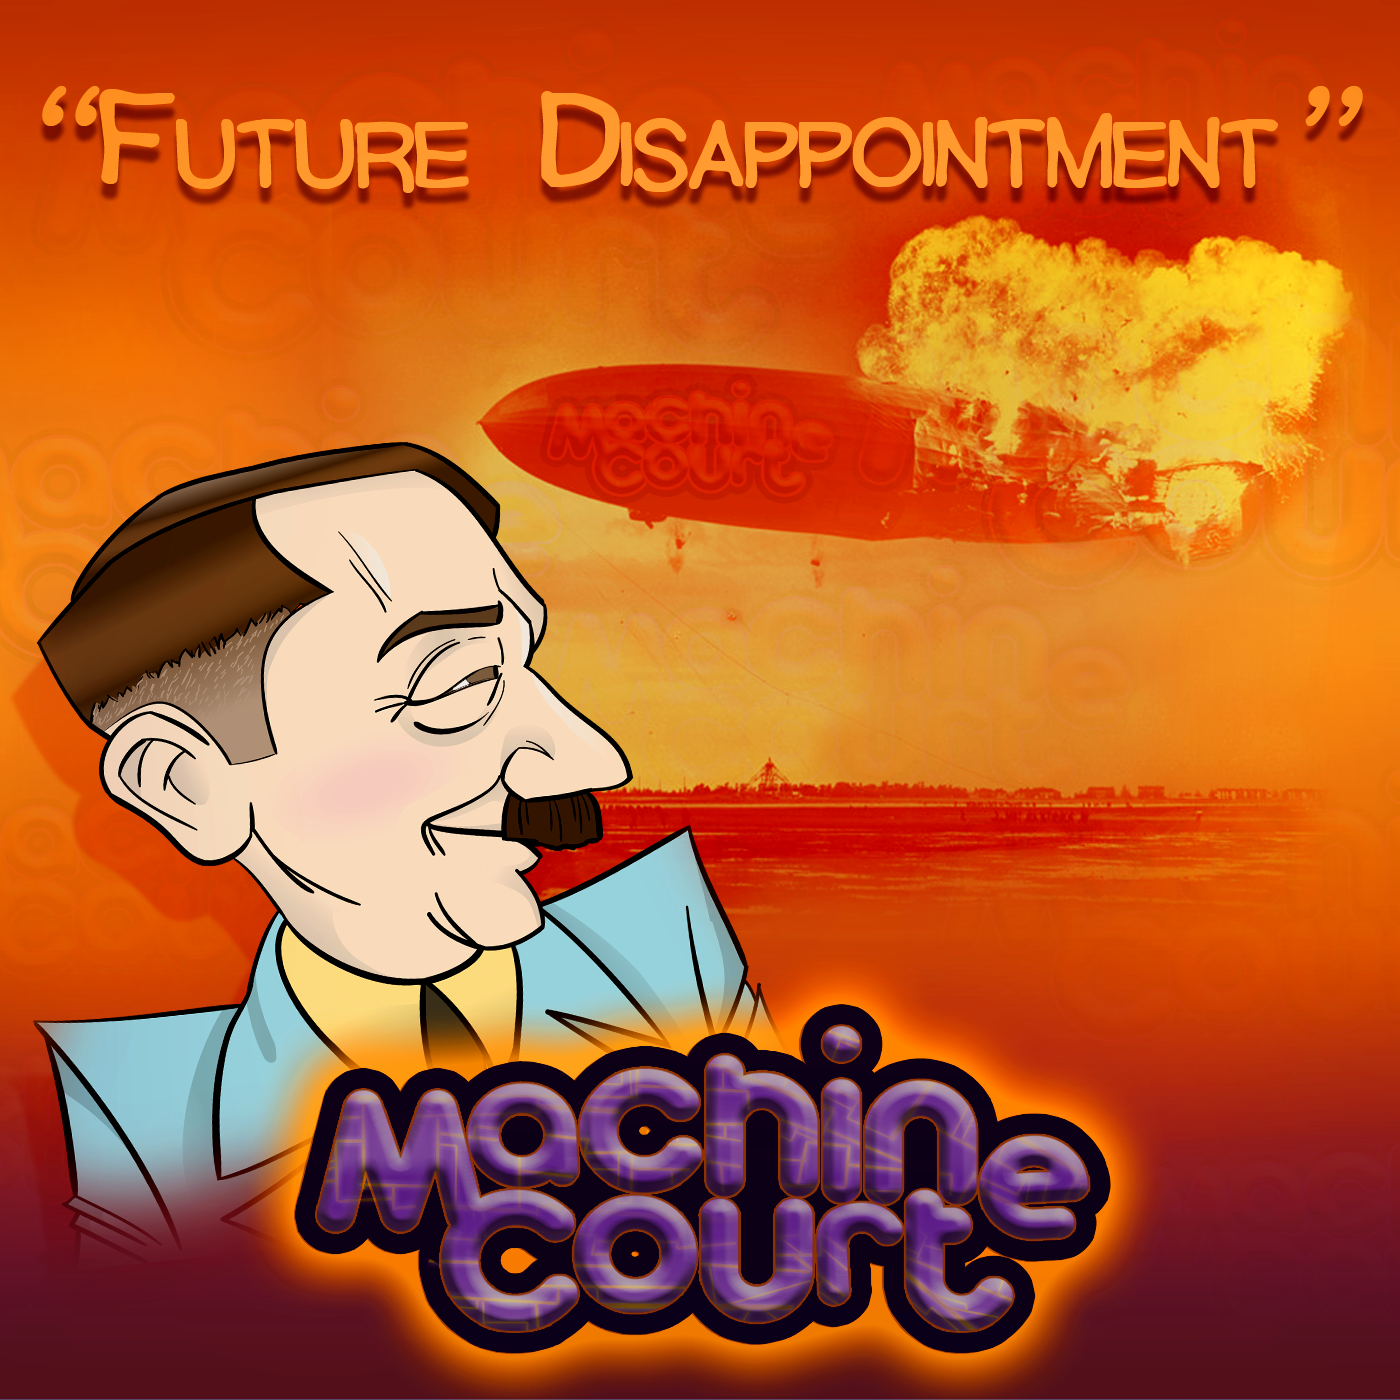 2.7 “Future Disappointment”